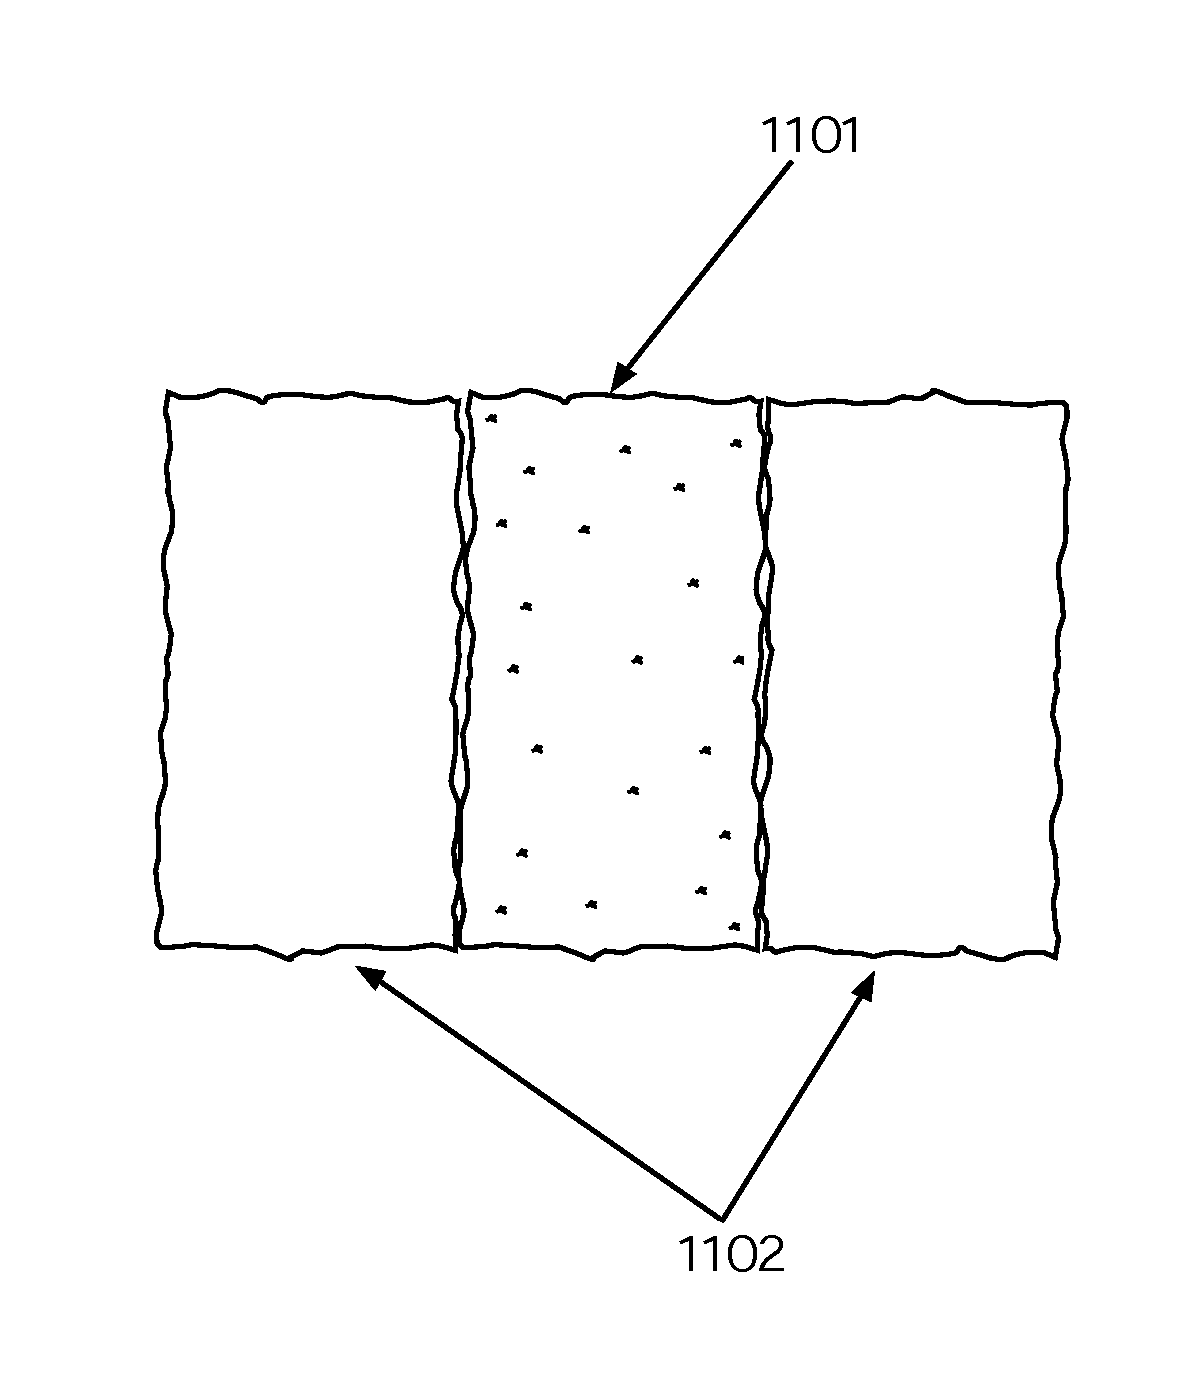 Novel biological implant compositions, implants and methods